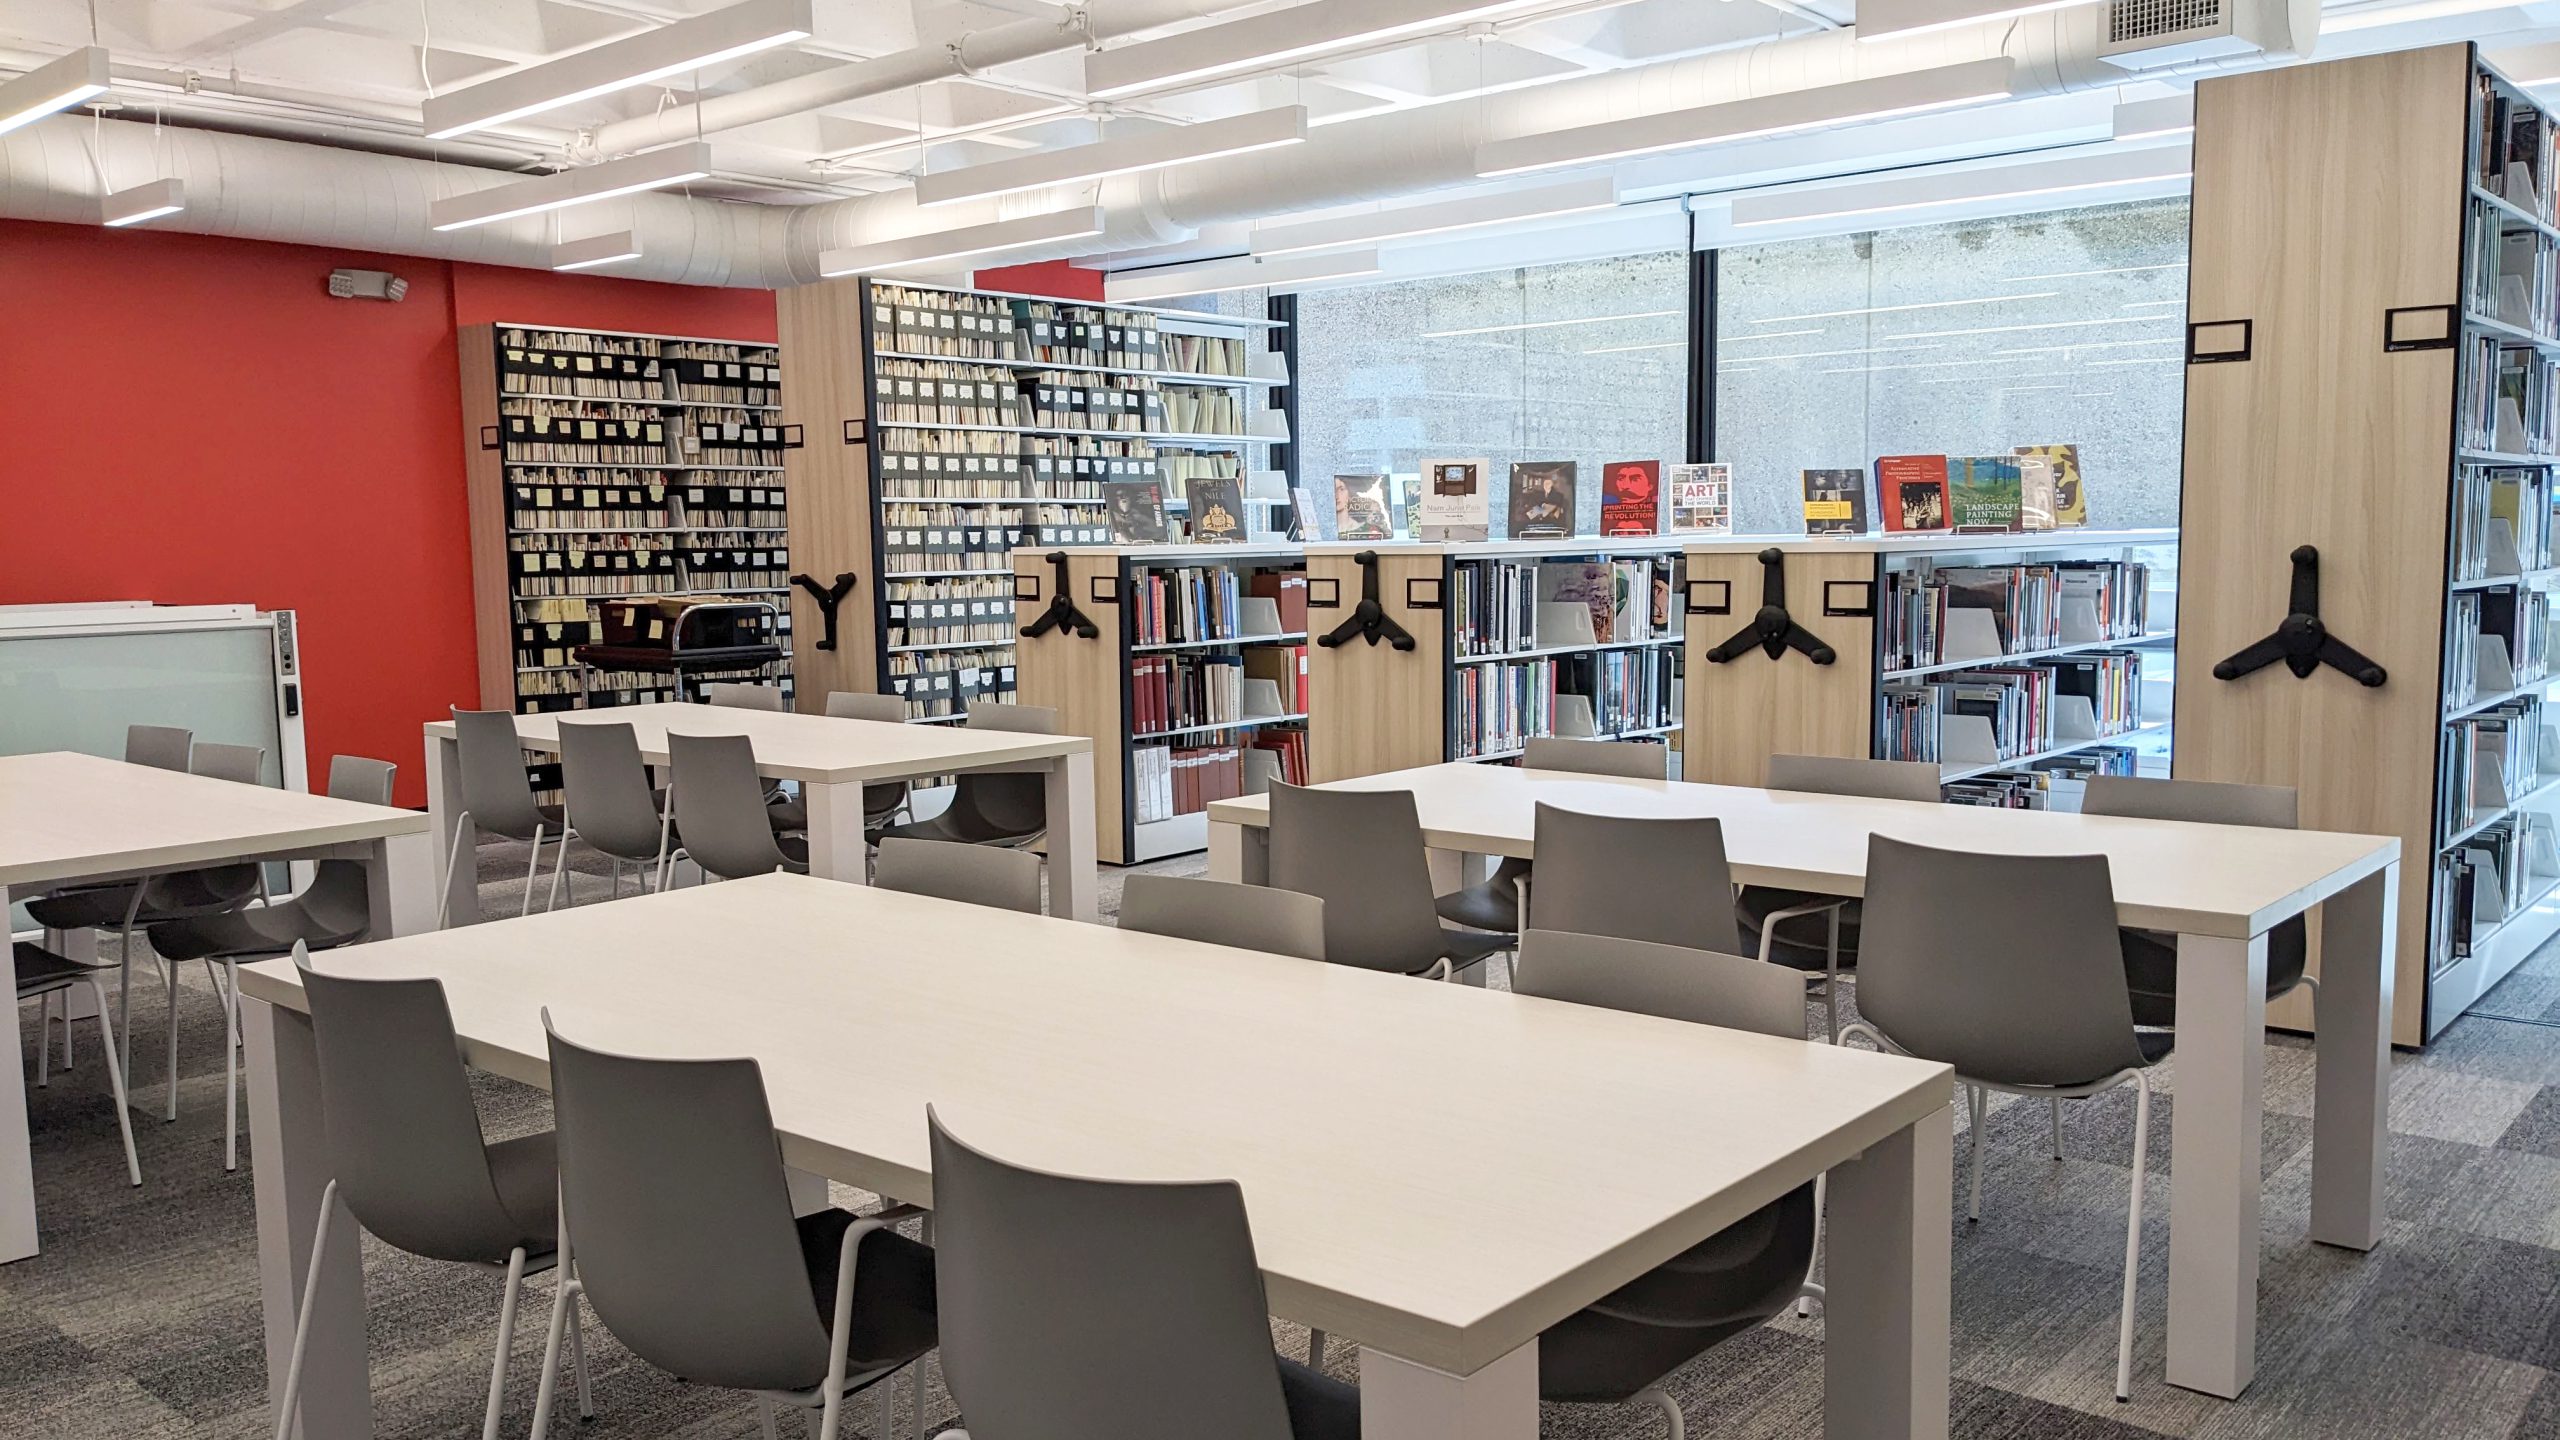 View of the reading room in the new Museum library